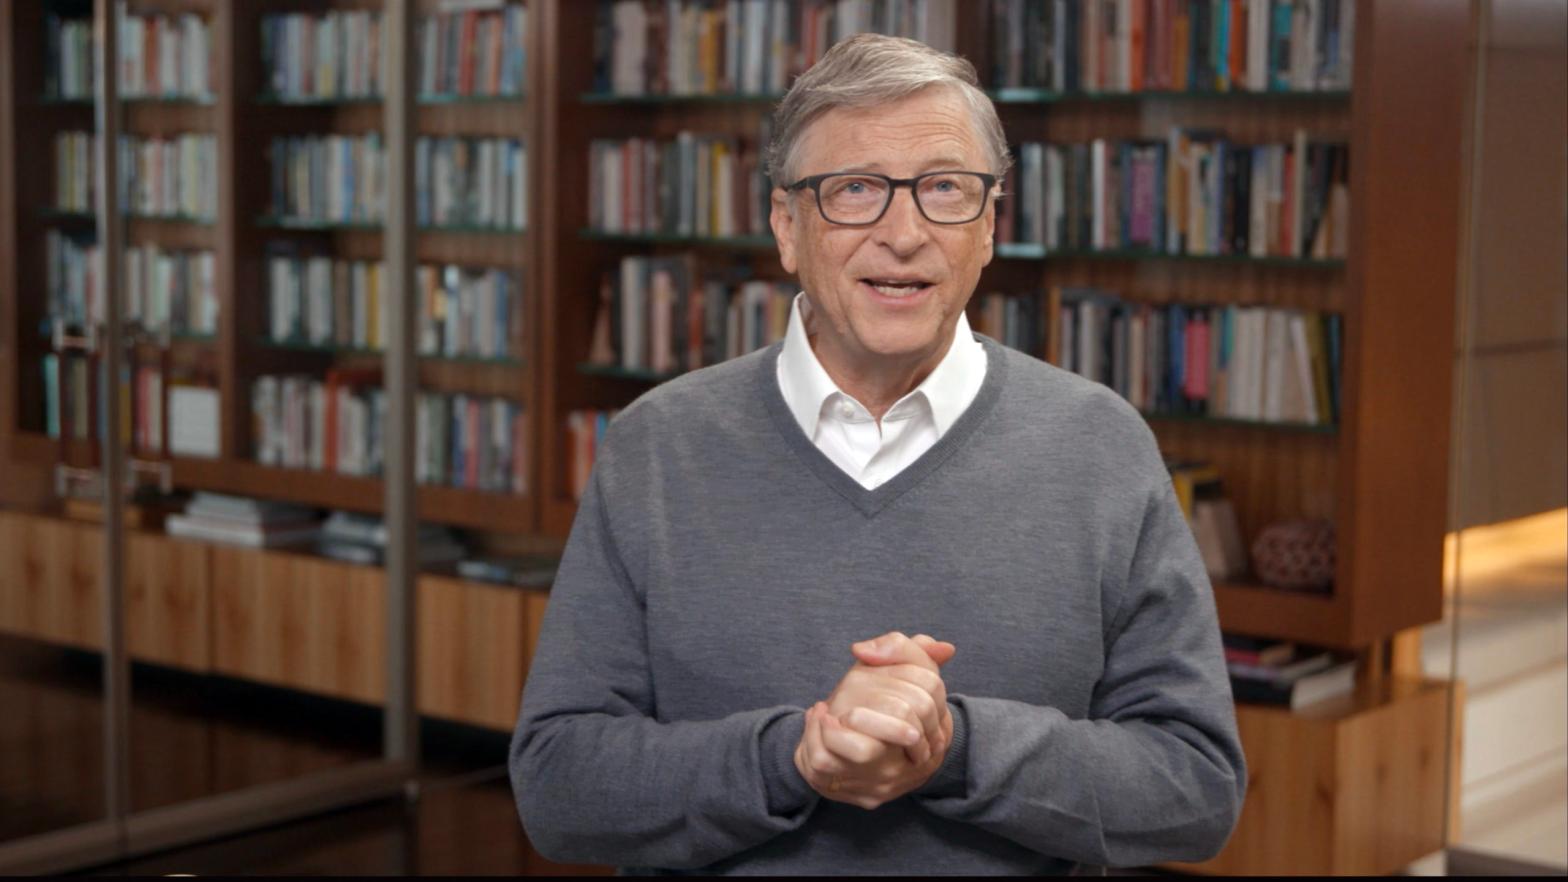 Bill Gates on June 24, 2020 in Washington. (Screenshot: Getty Images for All In WA, Getty Images)